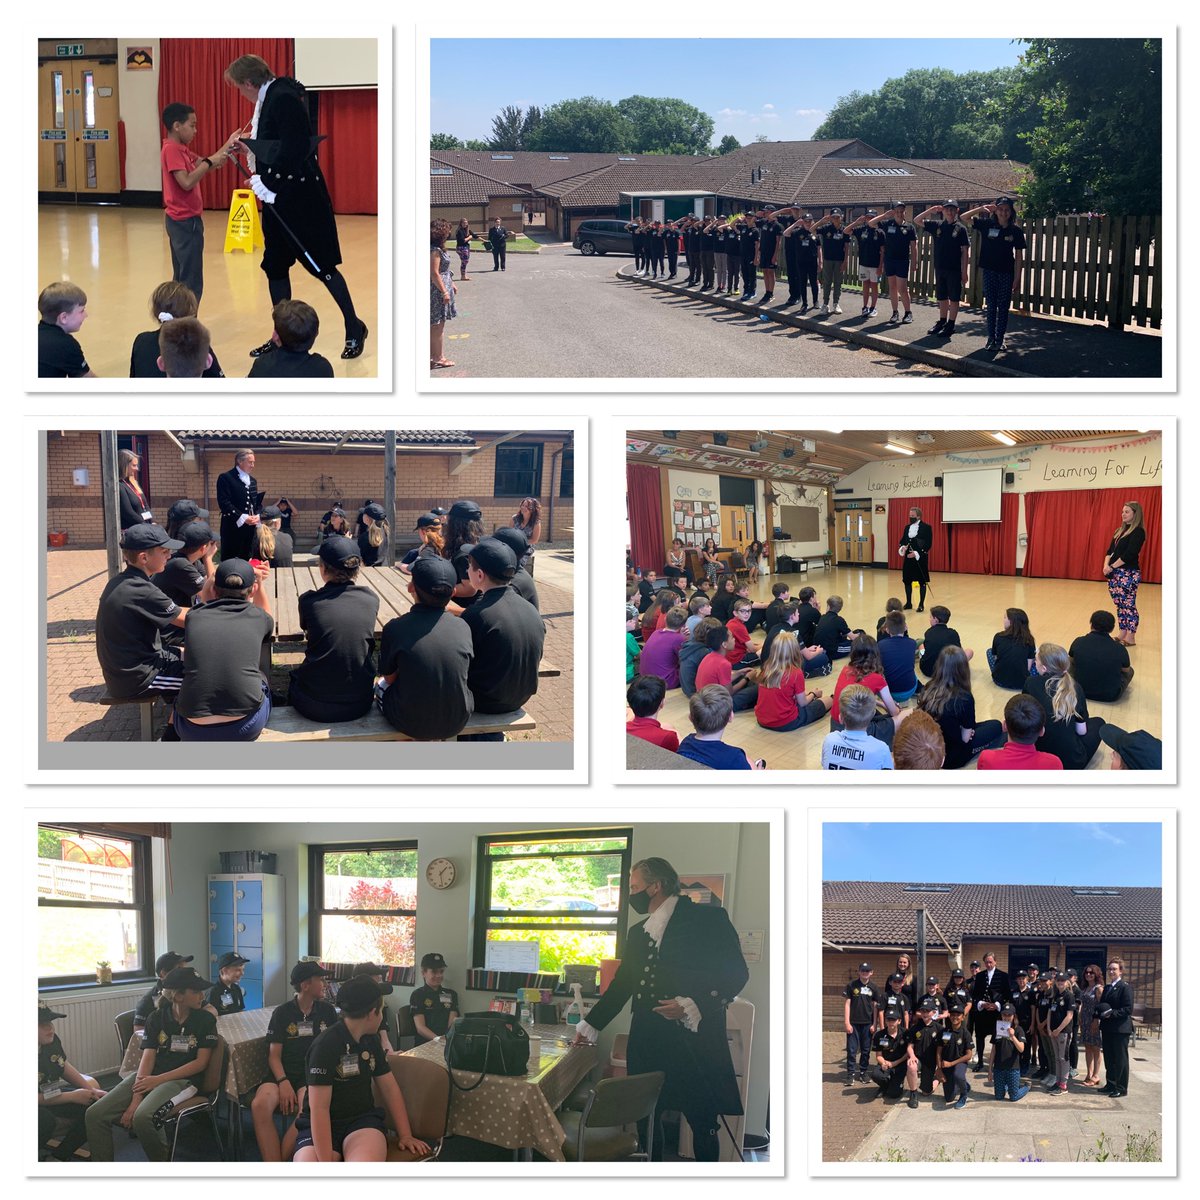 #NxtGen Sharron & @GPMonmouthshire Inspector Hughes had the pleasure of accompanying @HighSheriffGwent to vist the @MinipoliceR of @UndySchool Lots of questions from Yrs 5 & 6 about the High Sheriff role, uniform and sword. @gwentpolice @NationalVPC @GwentPCC